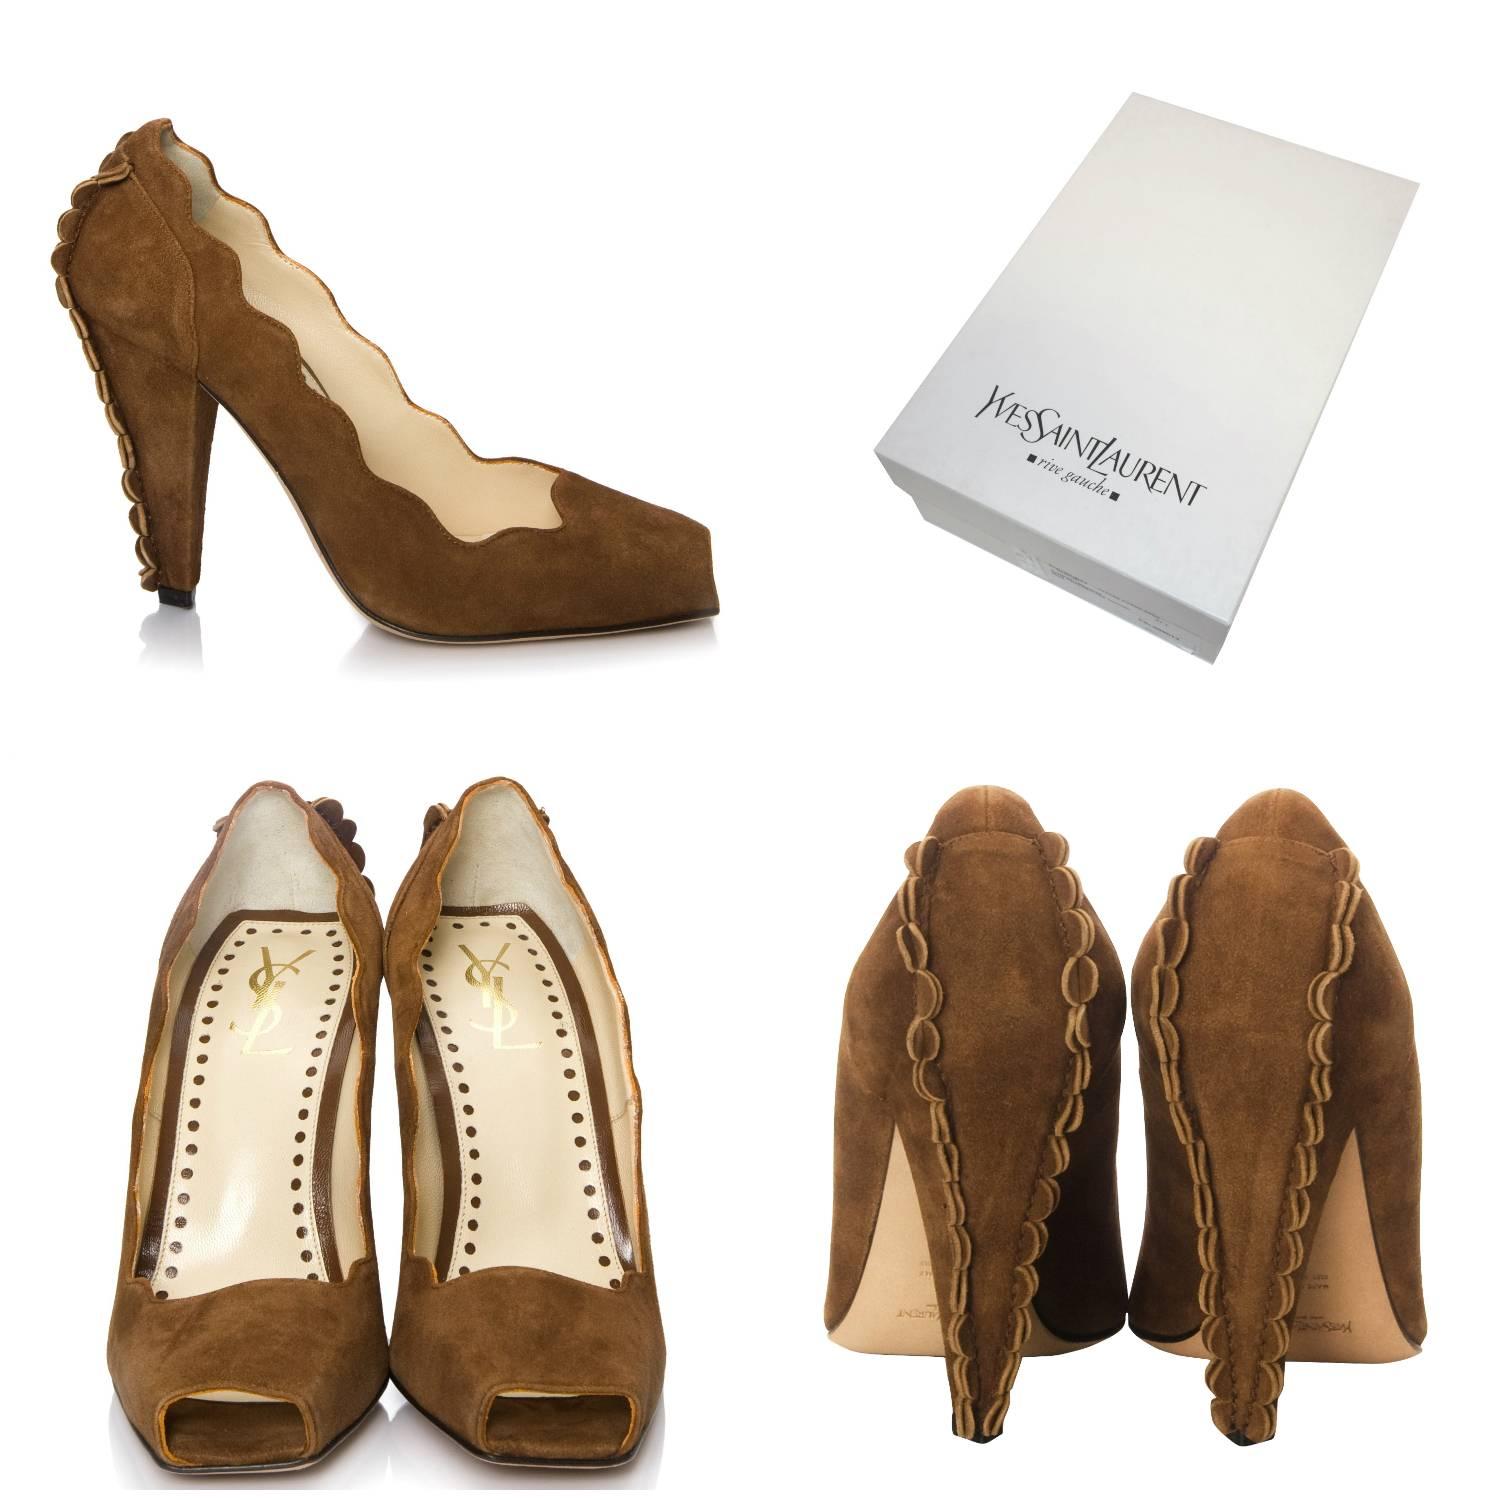 Tom Ford For YSL Heels
Brand New
* Stunning Suede In Camel
* Tom Ford's Final Years w/ YSL
* Iconic and Impossible to Find New
* Unique Scalloped Sides & Heel
* Leather Insole 
* Open Square Toe 
* 4.5